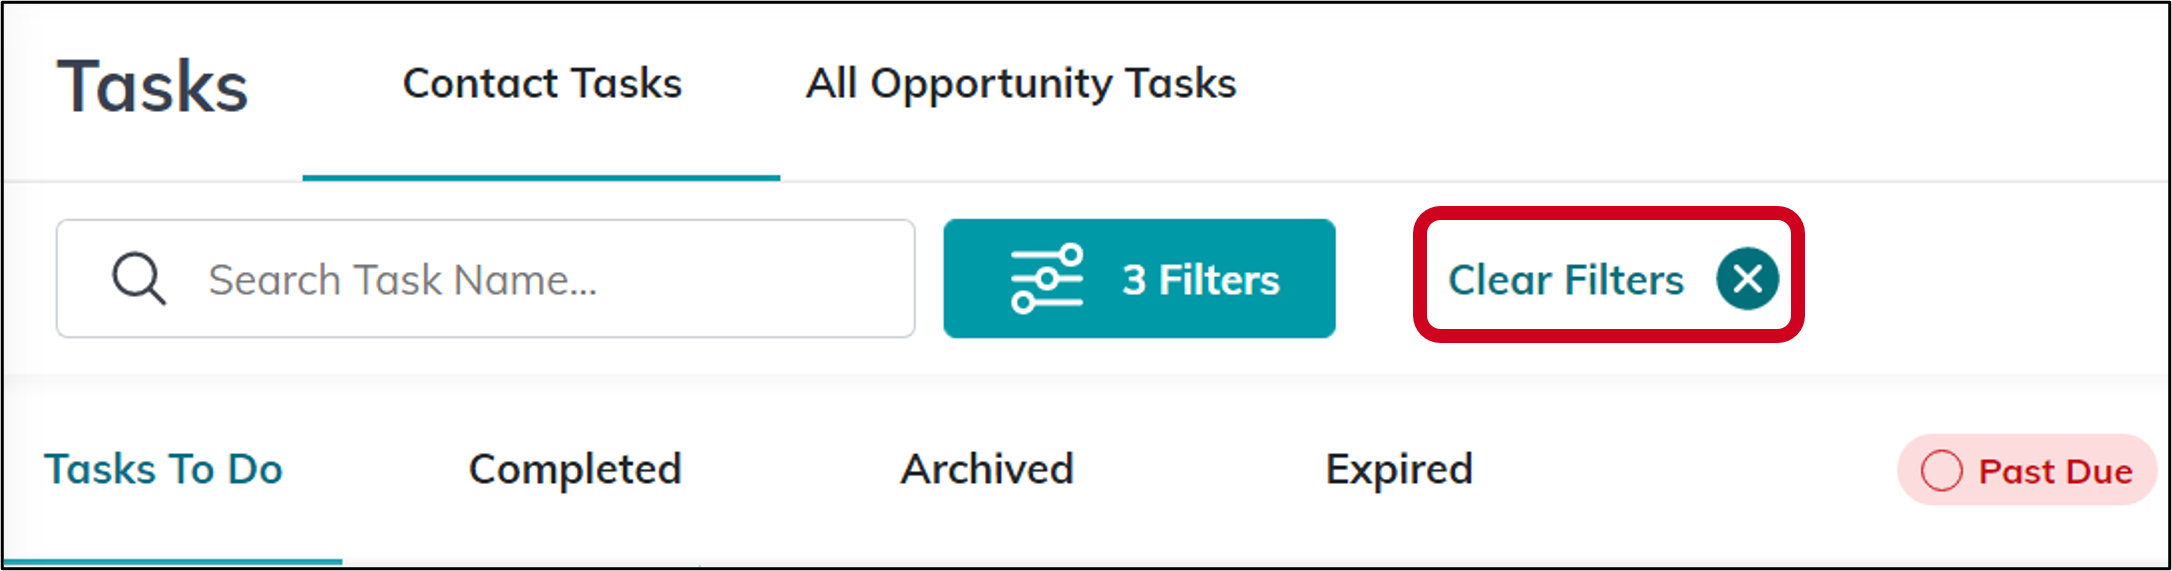 tasks_clear_filters.png